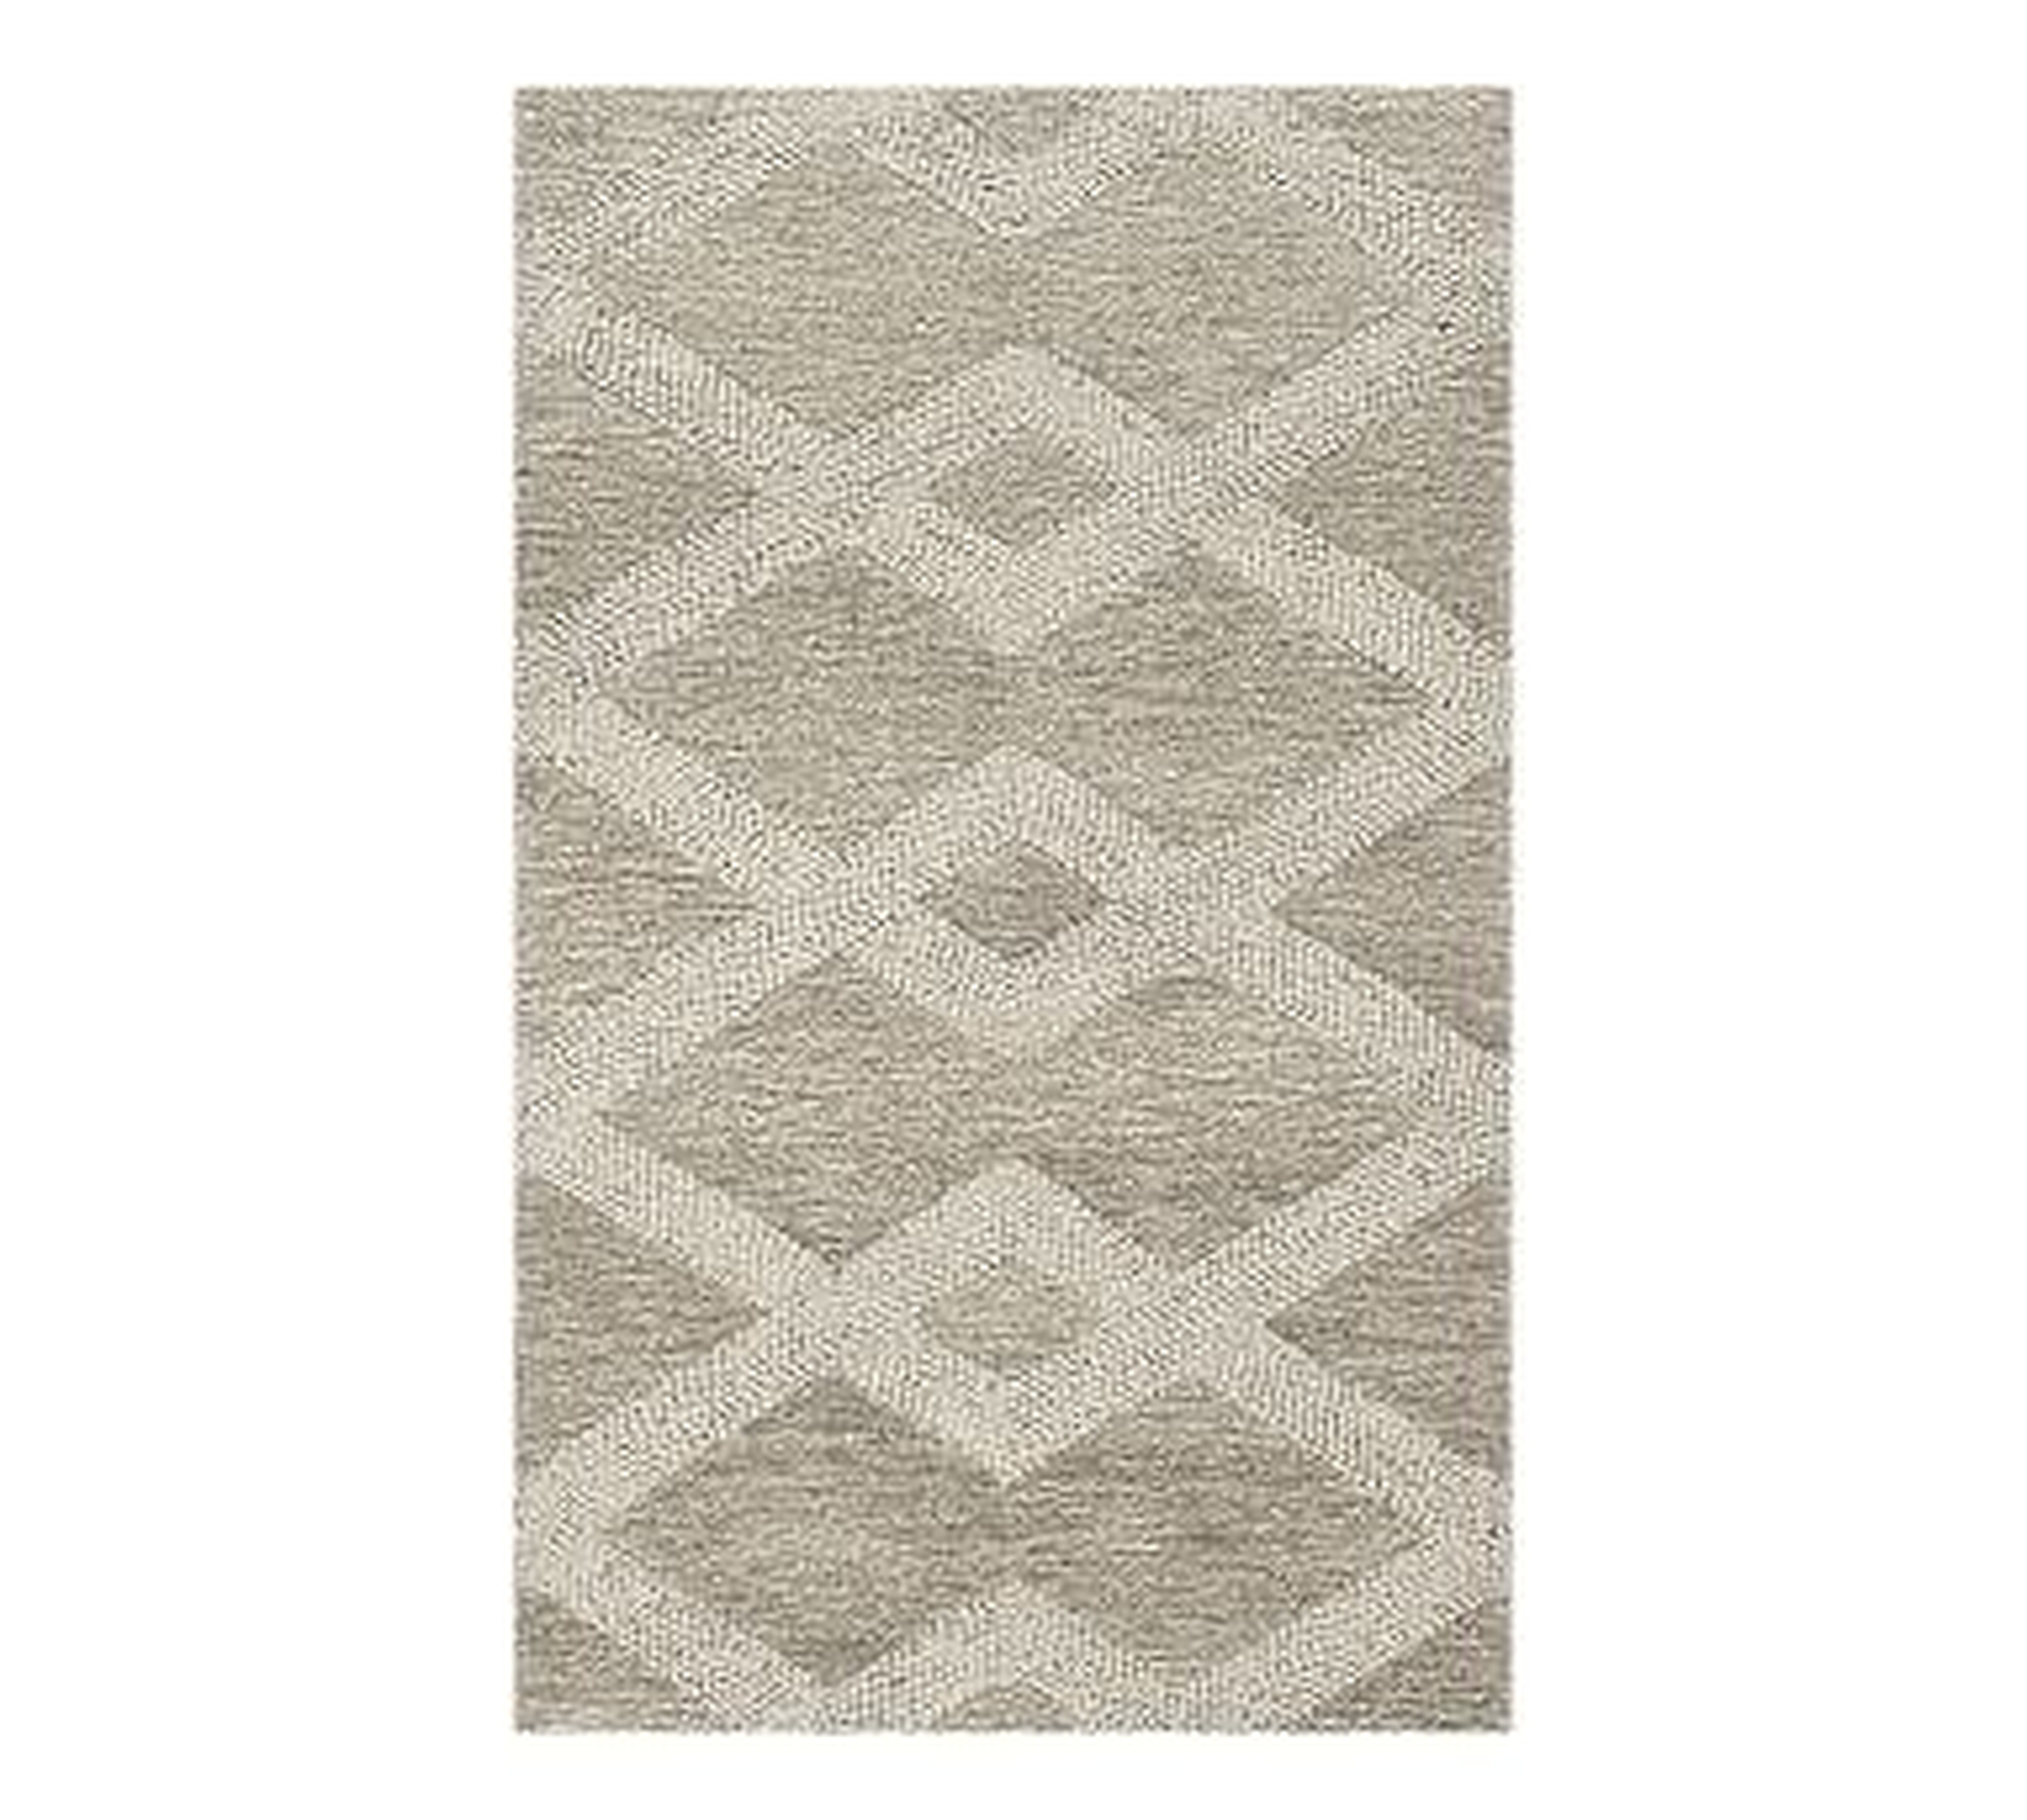 Chase Tufted Rug, 3x5', Natural - Pottery Barn